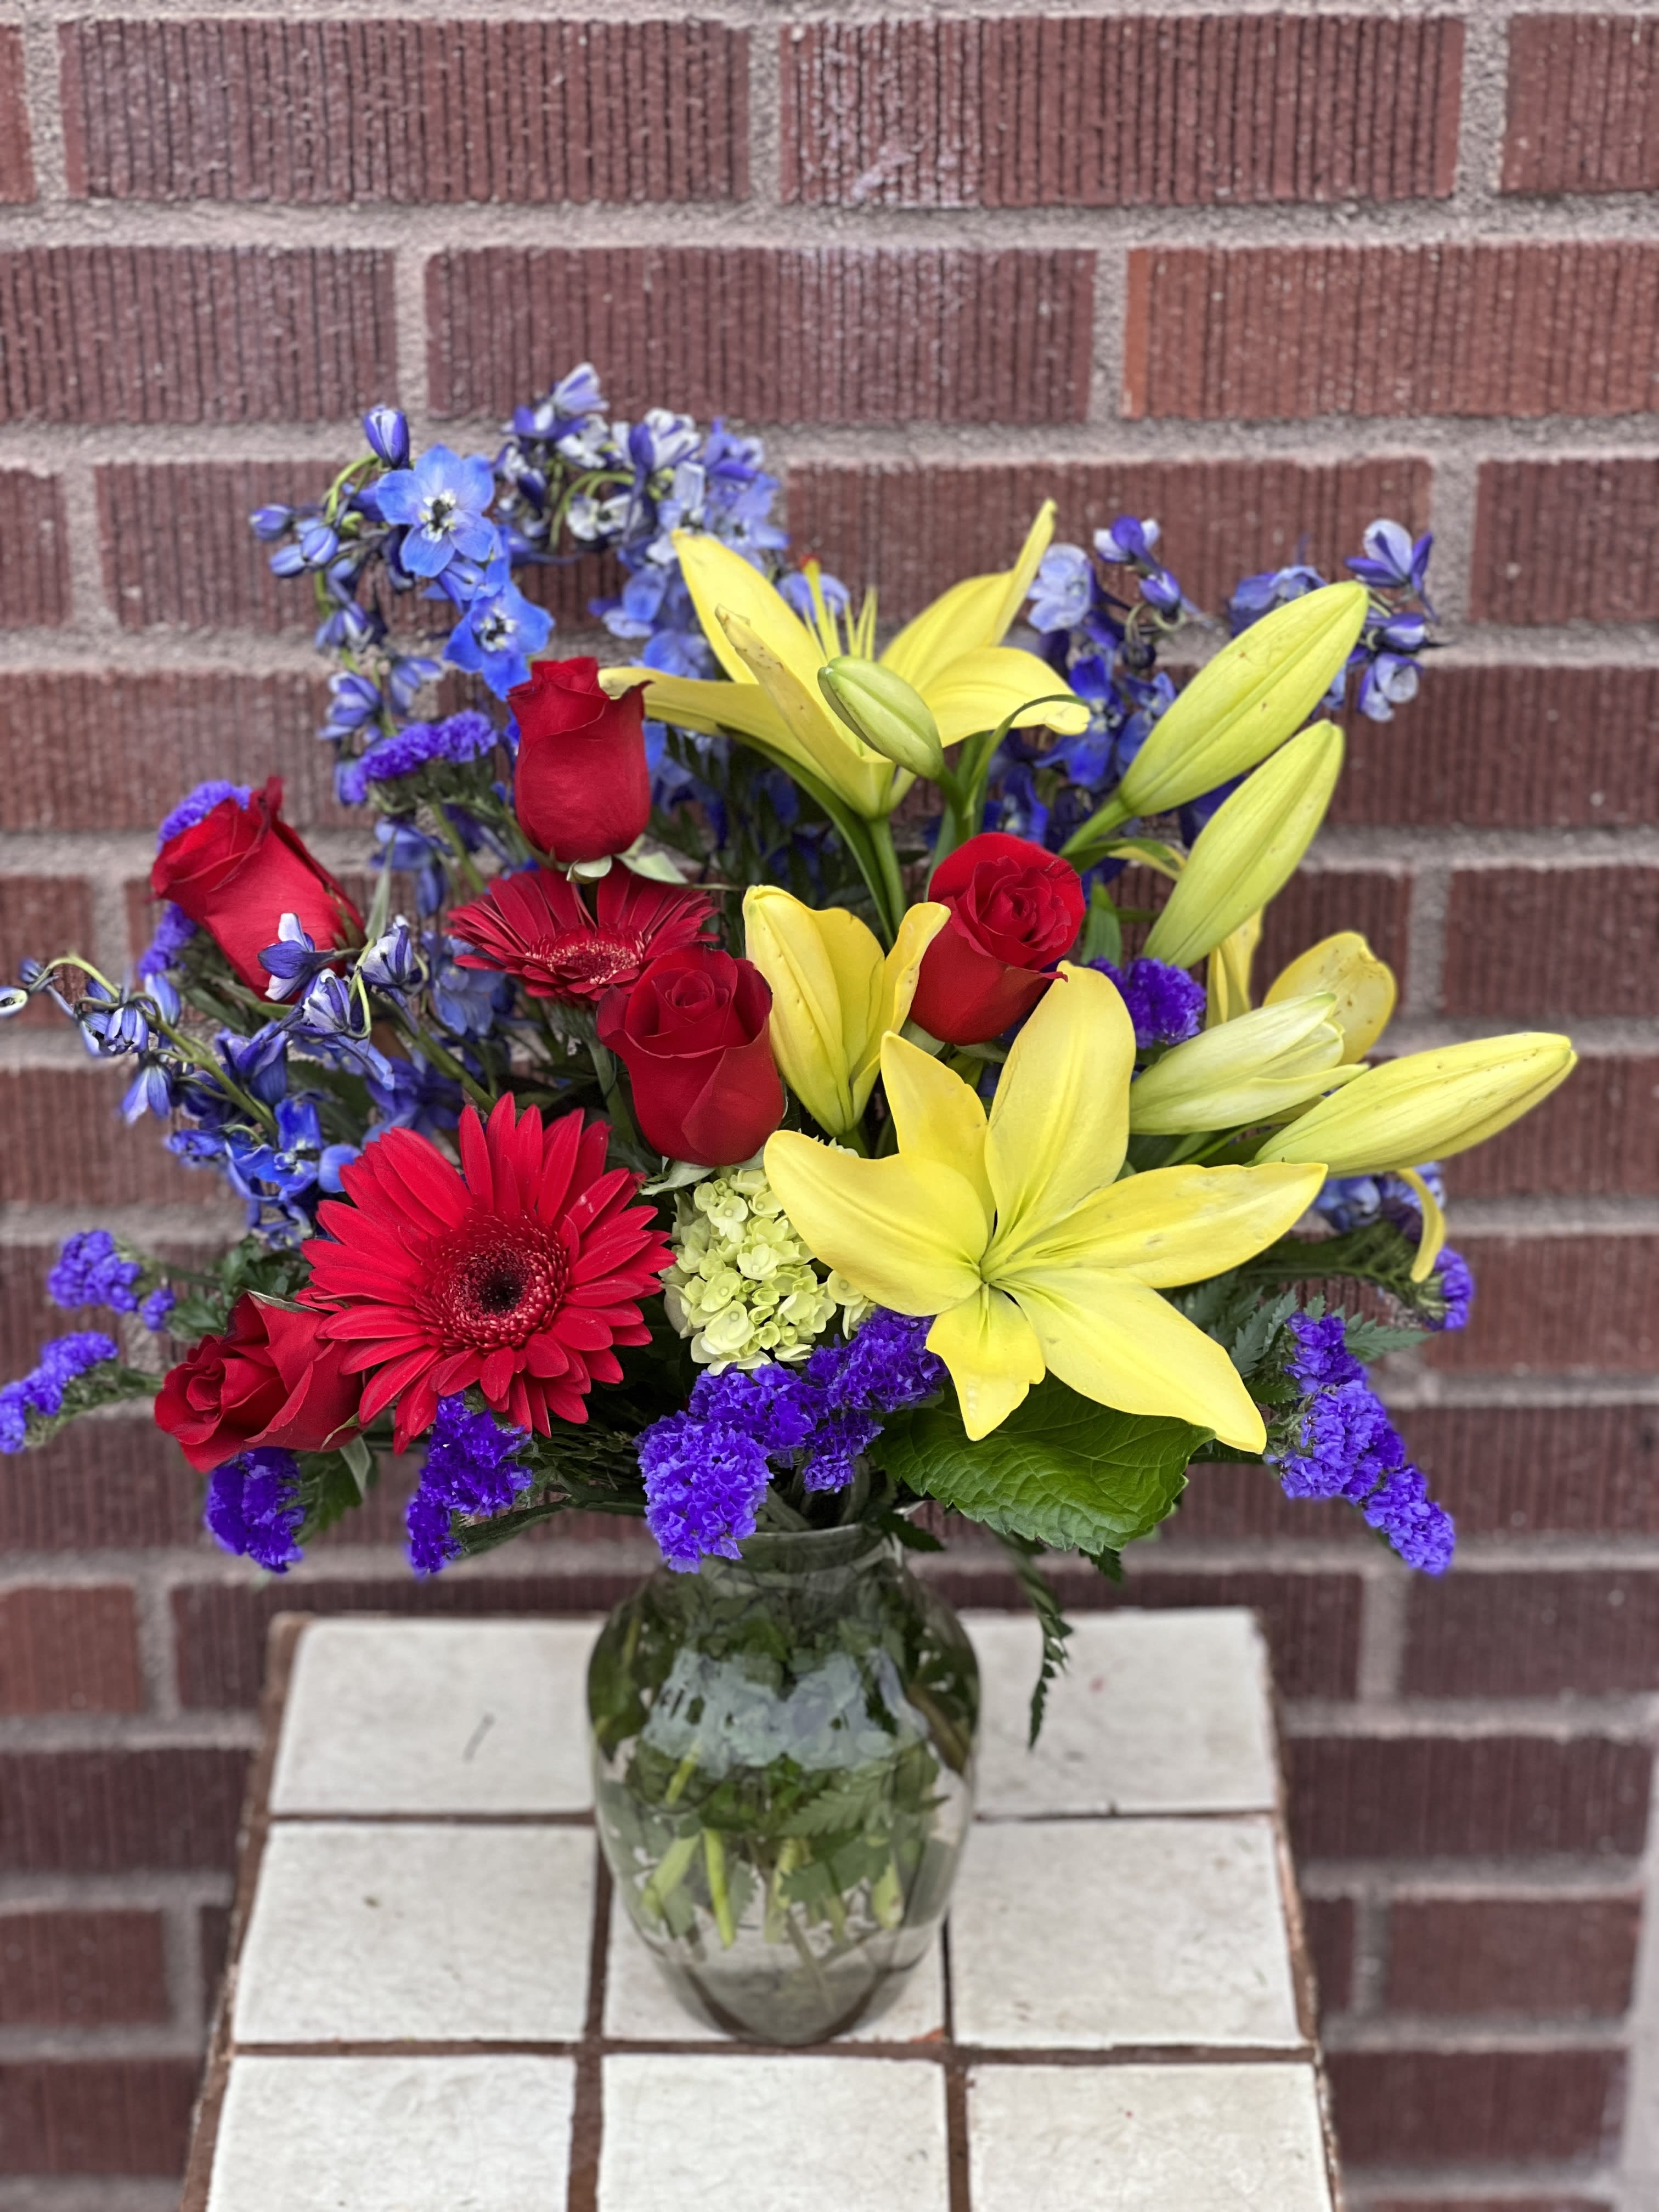 Primary Petals - In a mix of primary colors, this bright arrangement designed by one our local girls is sure to lift spirits!